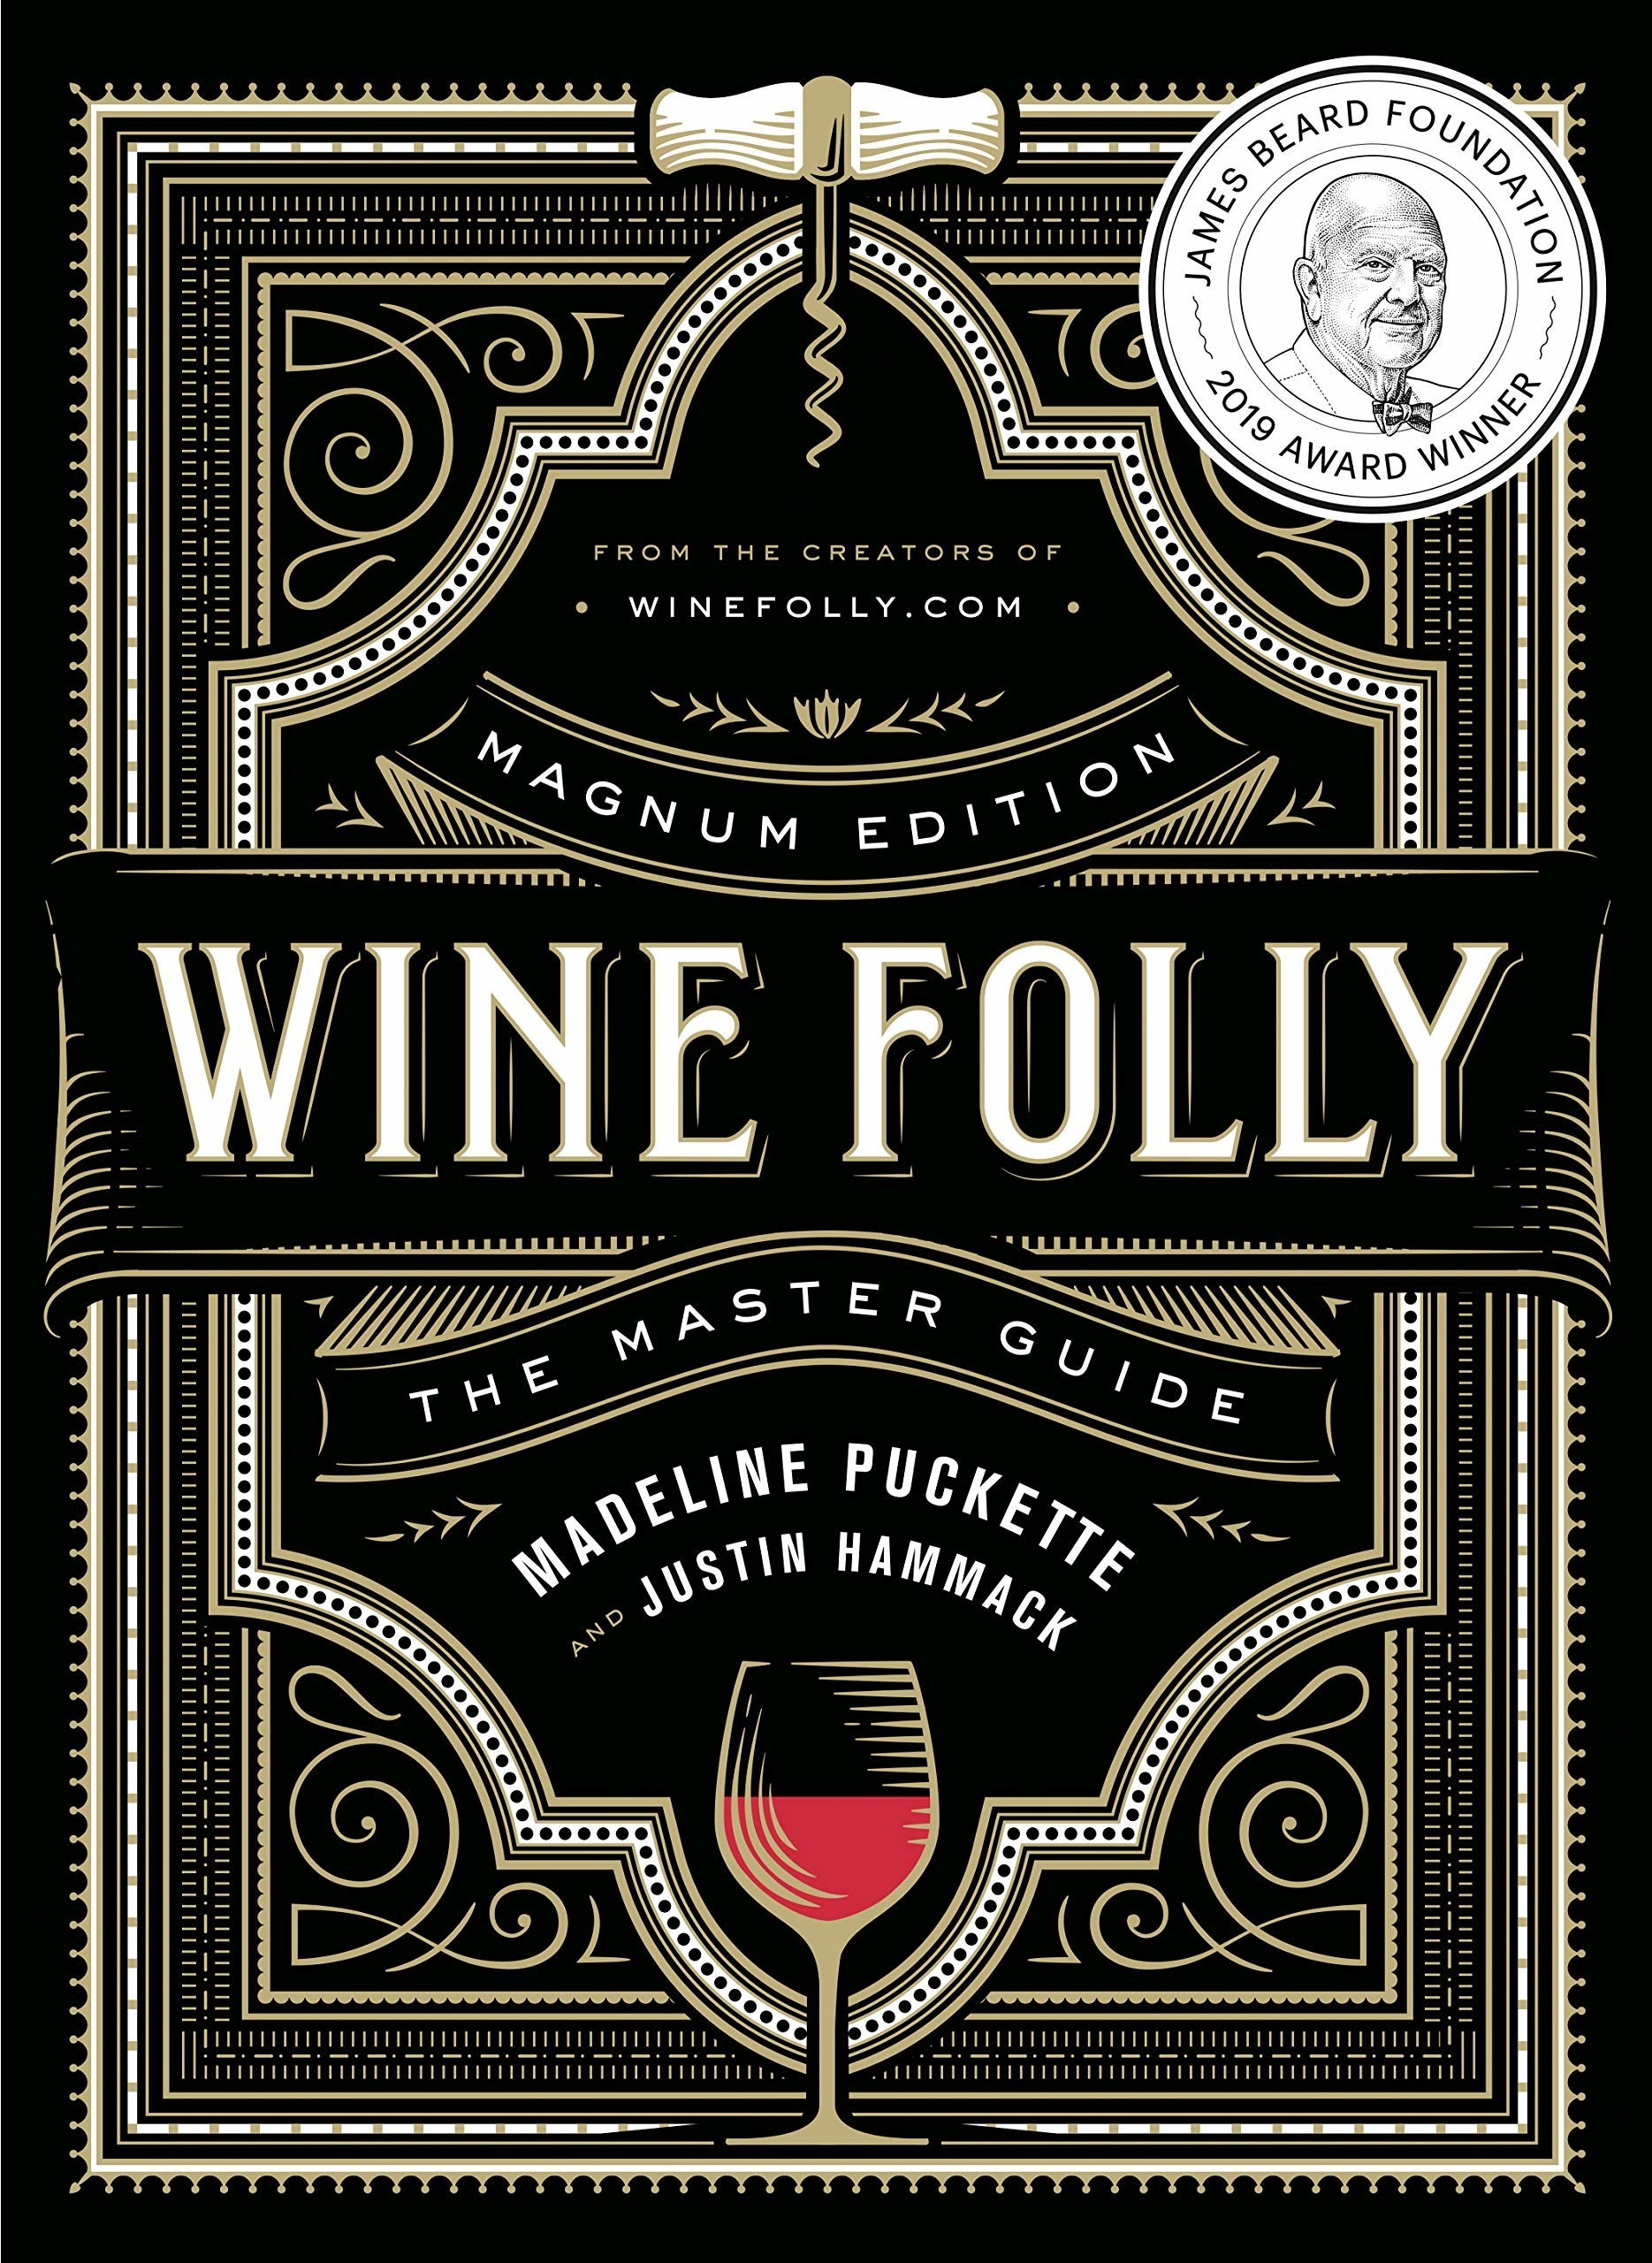 A book called wine folly